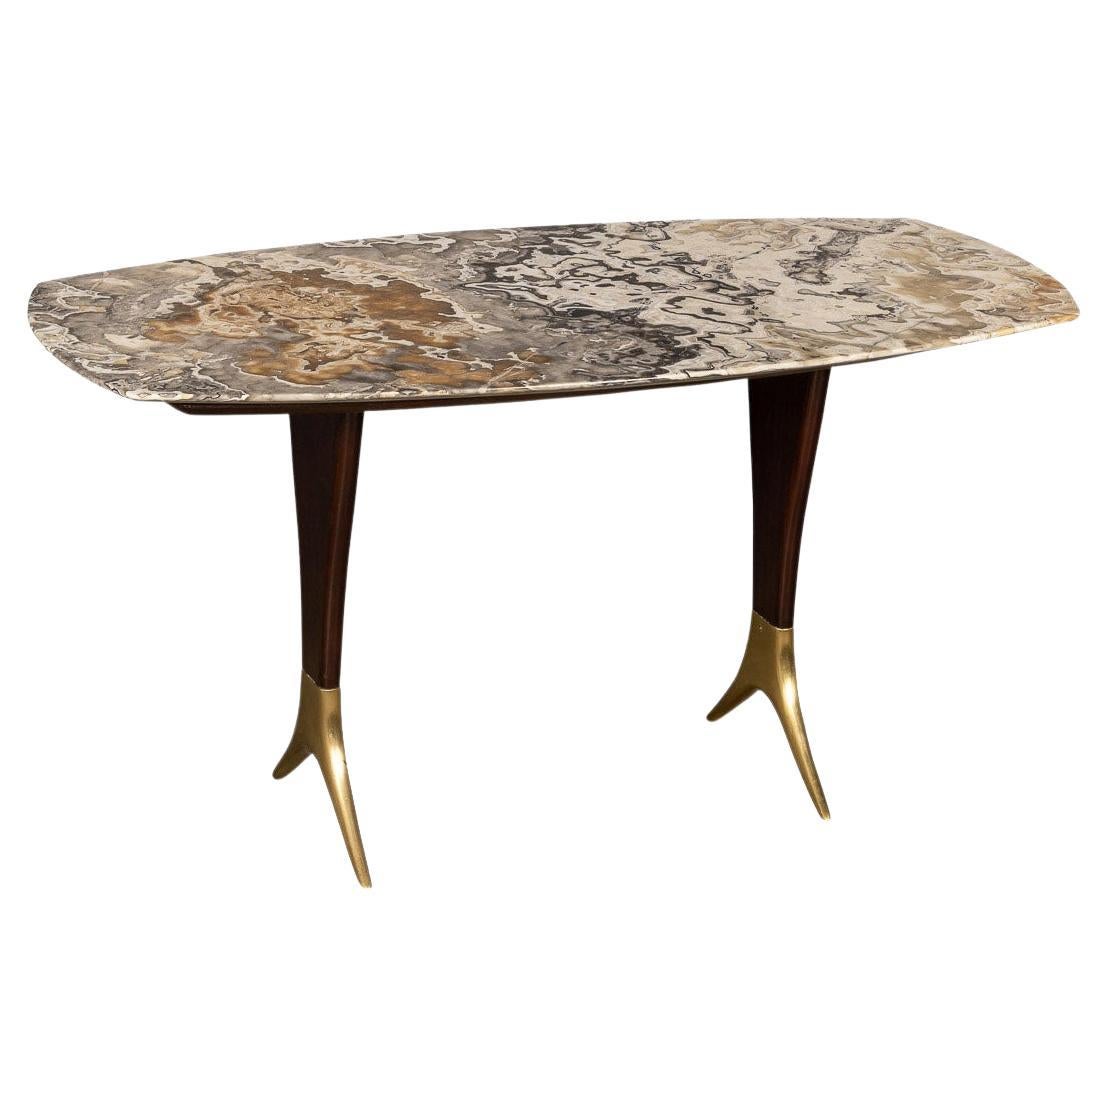 20th Century Italian Marble Coffee Table, c.1950 For Sale